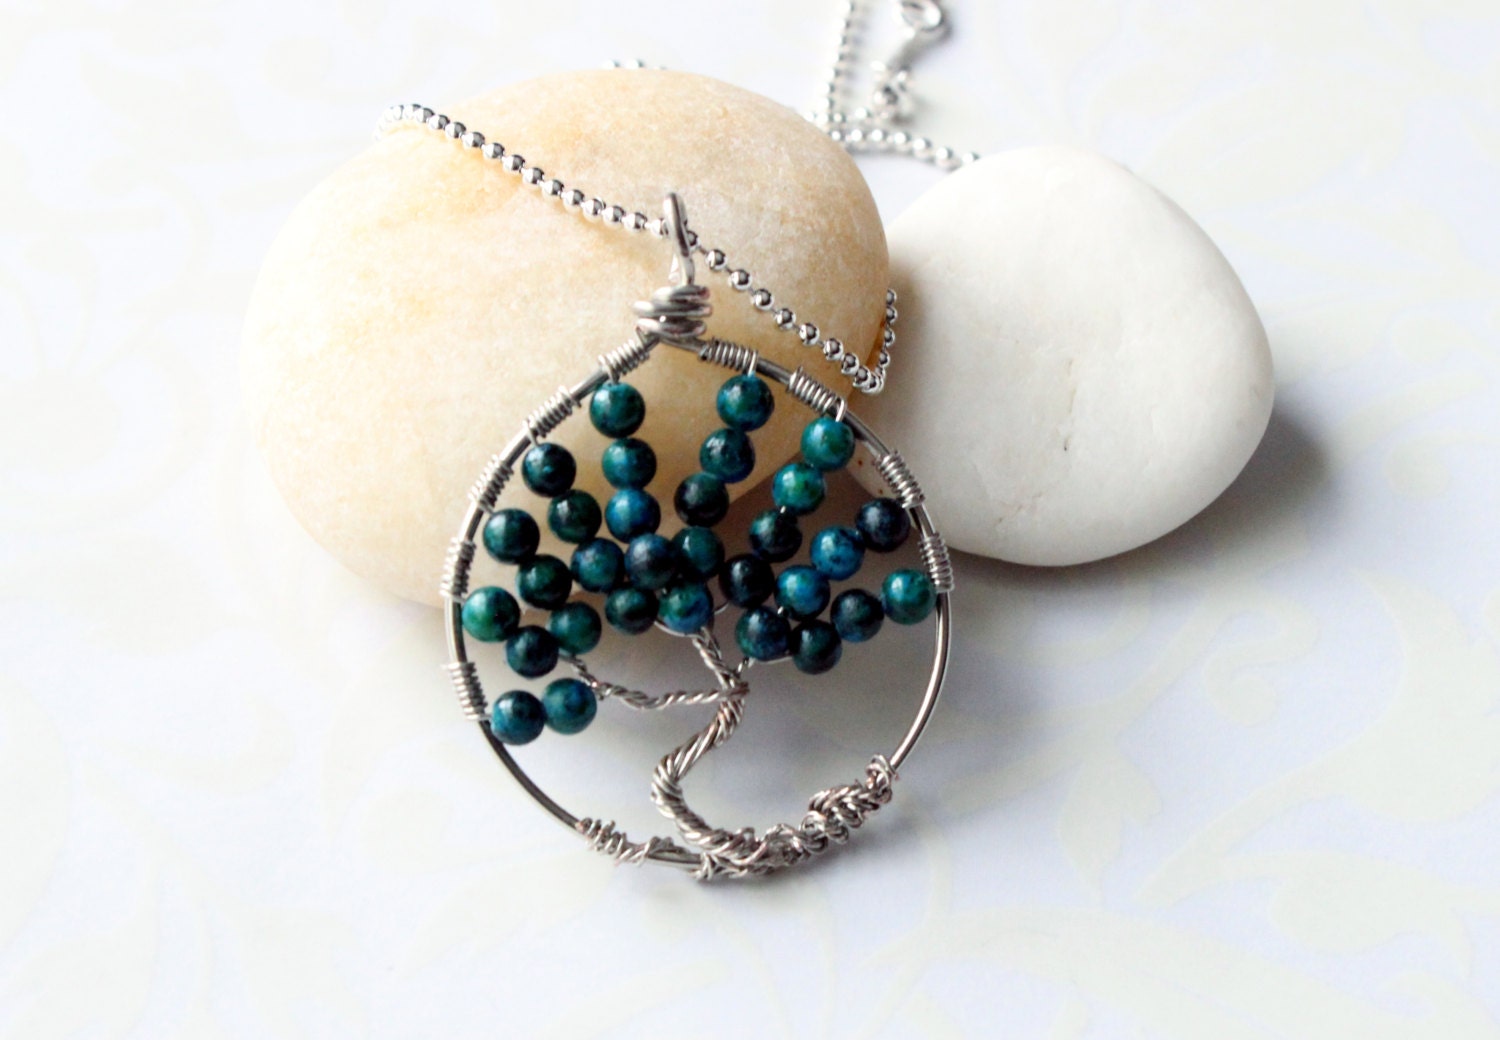 Unique Tree Of Life Handmade Wirewrapped With Turquoise Natural Gem Stone Pendant Necklace - RTStyles